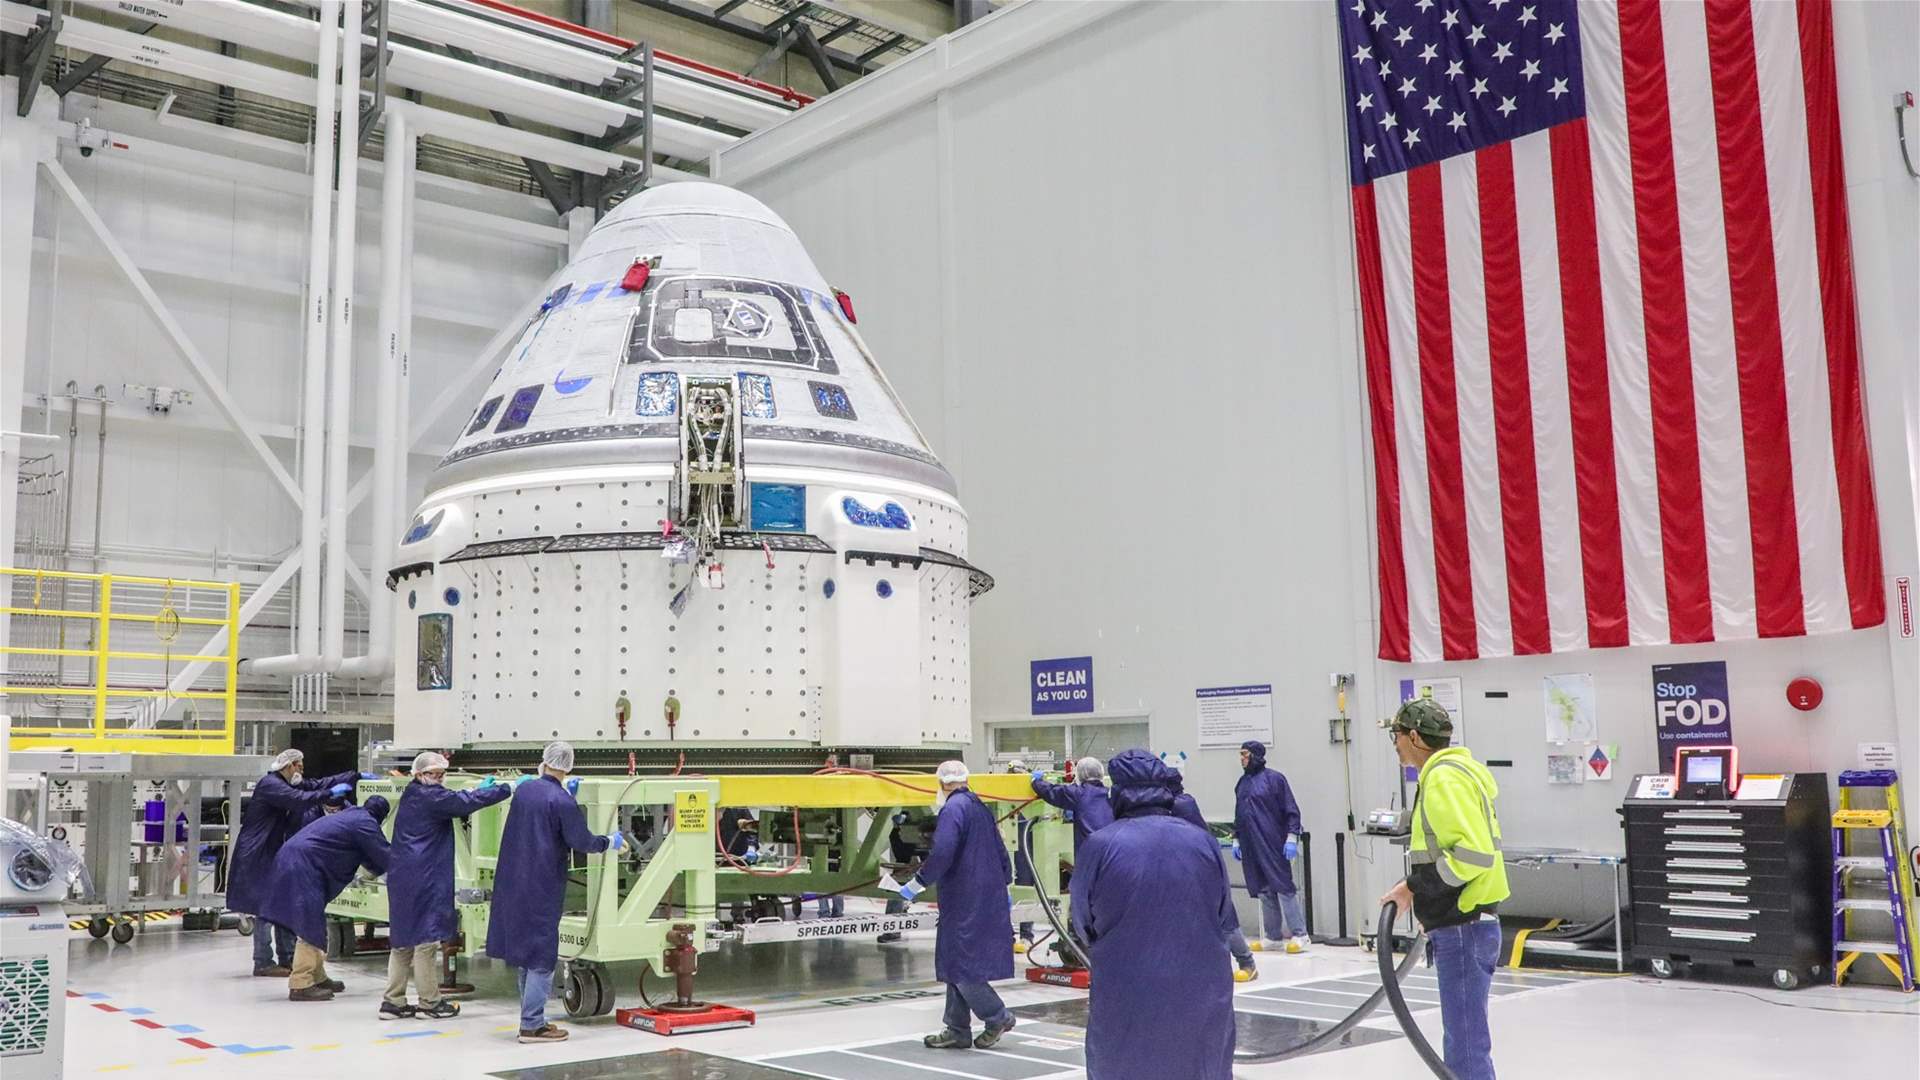 Starliner spacecraft will be ready to take off in March